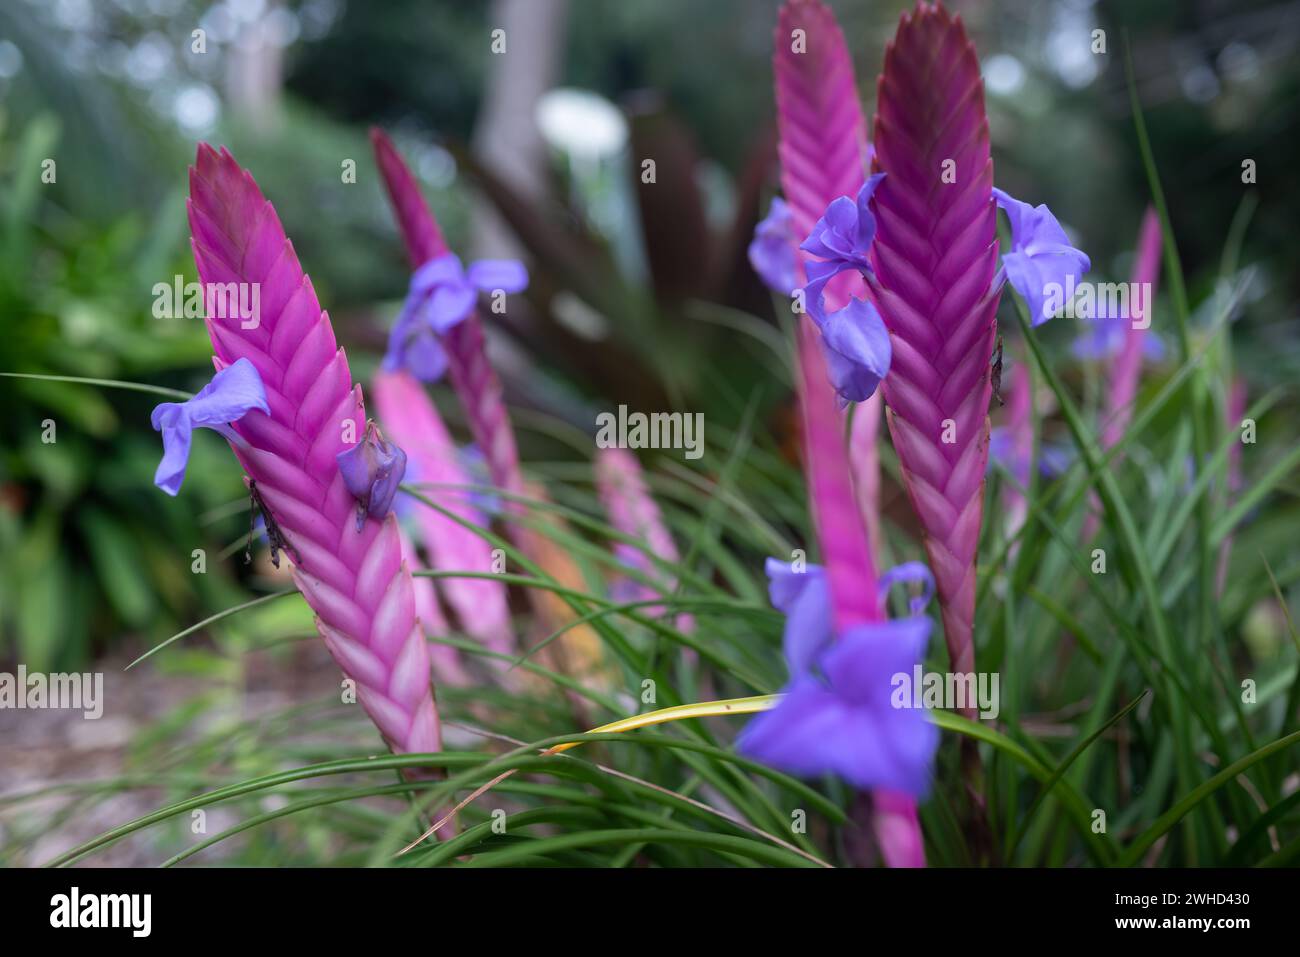 Pink, lilac and blue flowers closeup. Pink quill or tillandsia guatemalensis Stock Photo